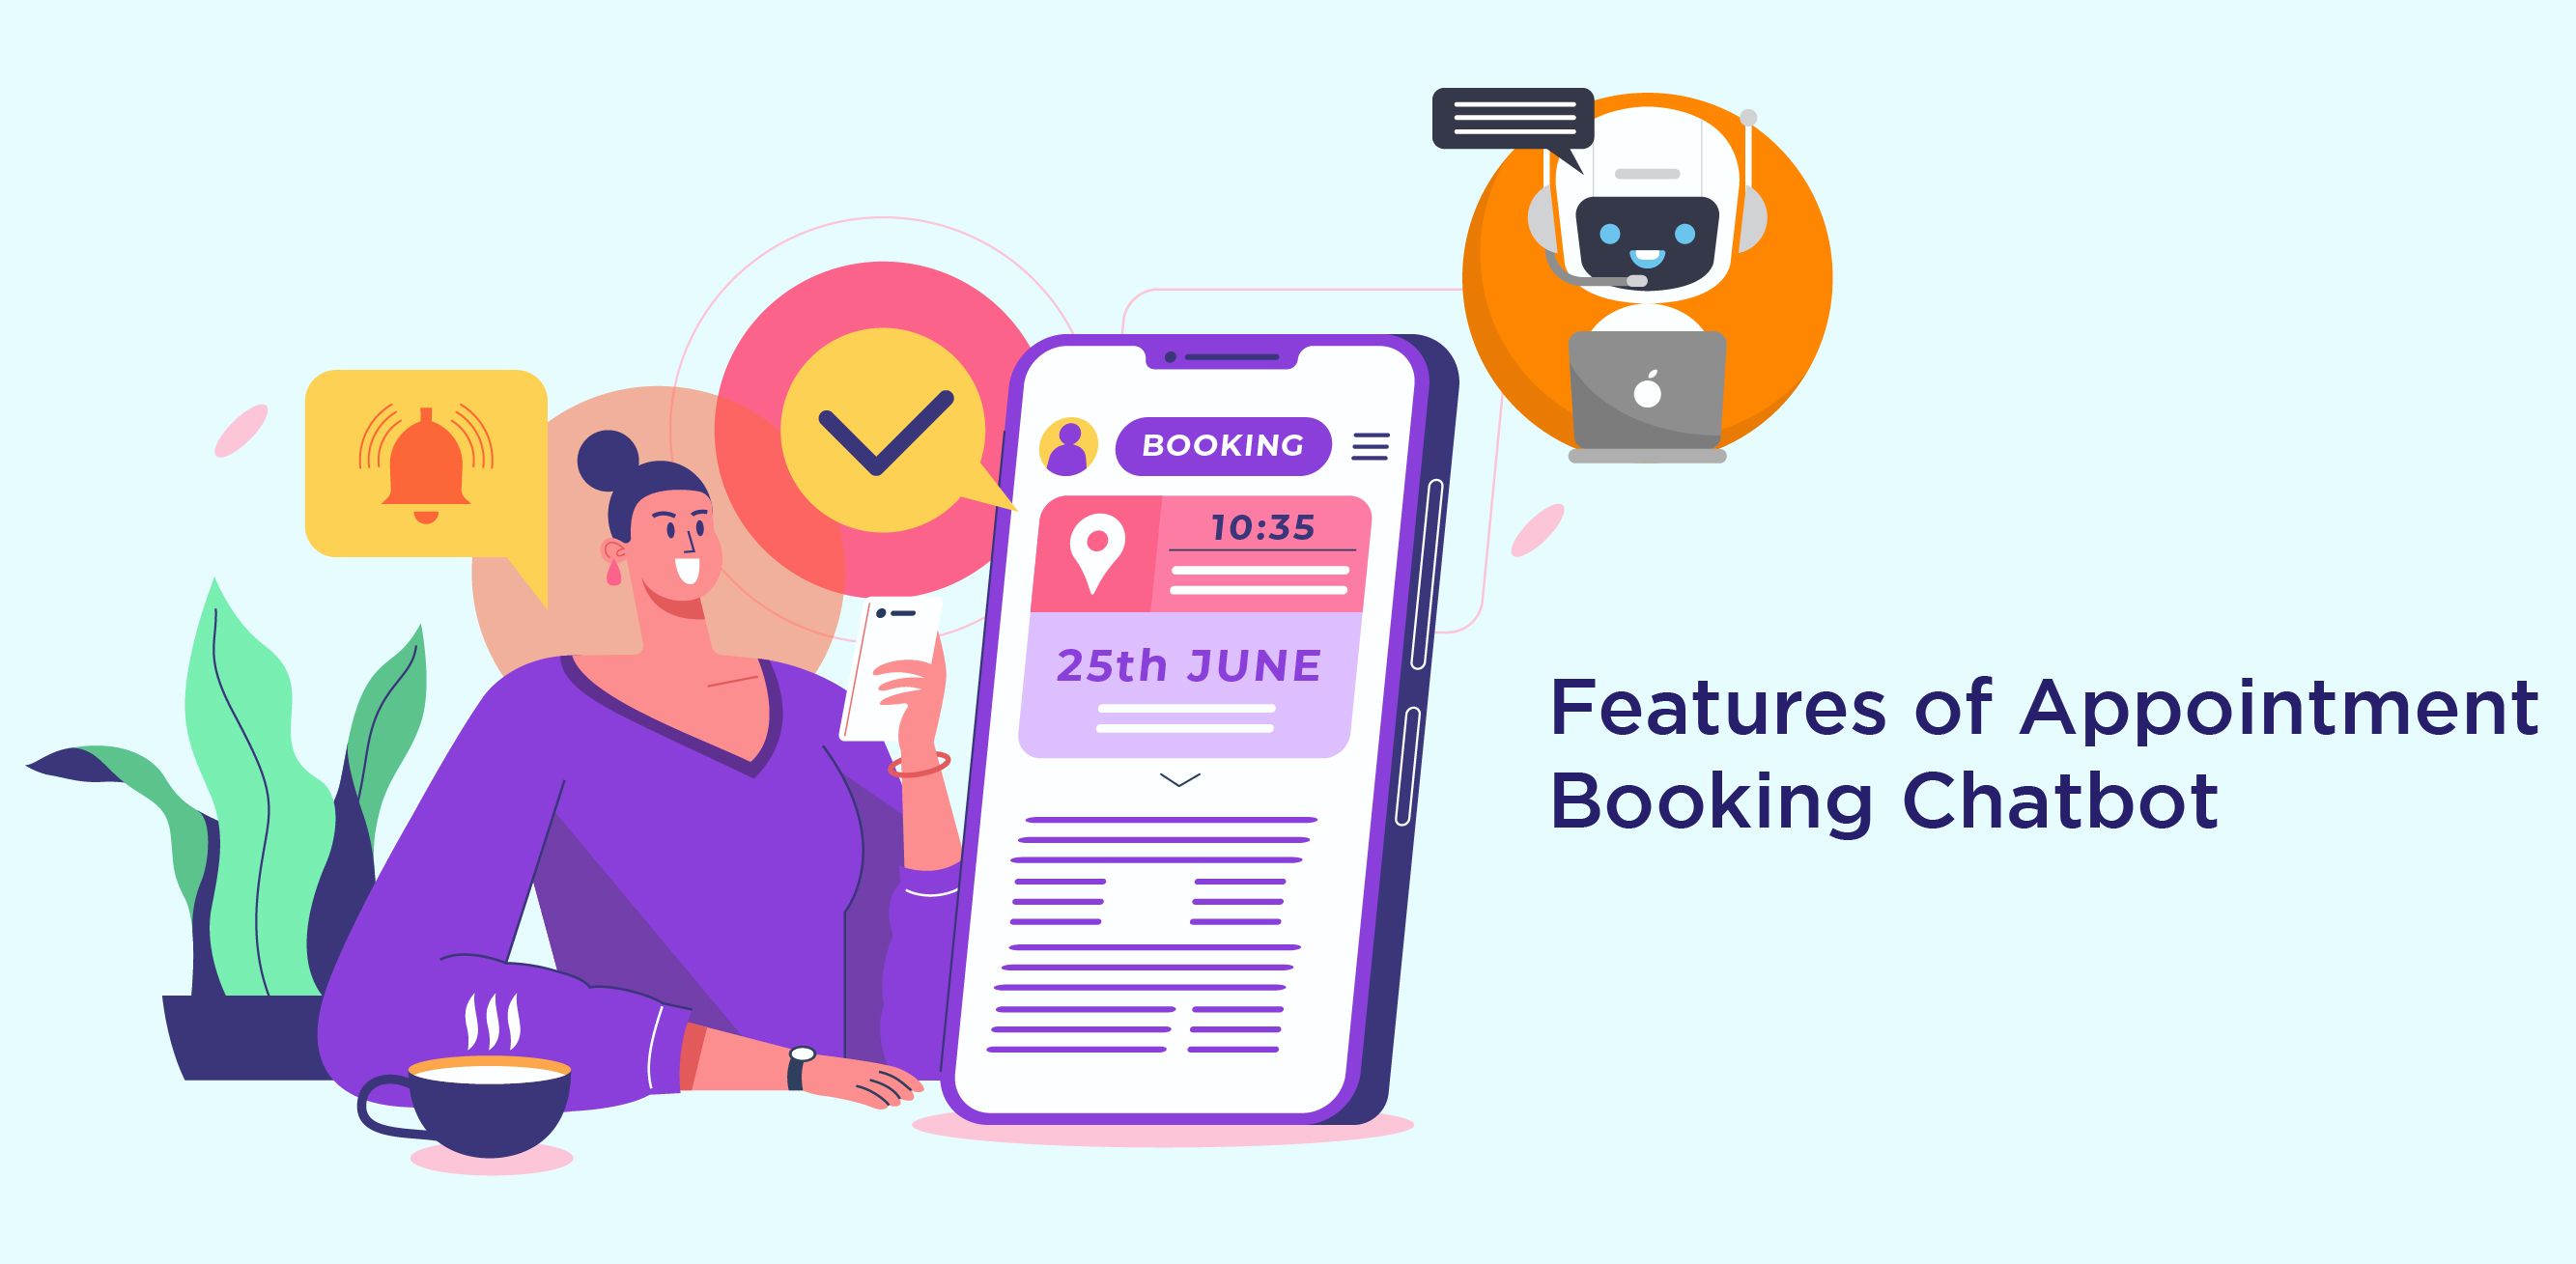 Features of appointment booking chatbot